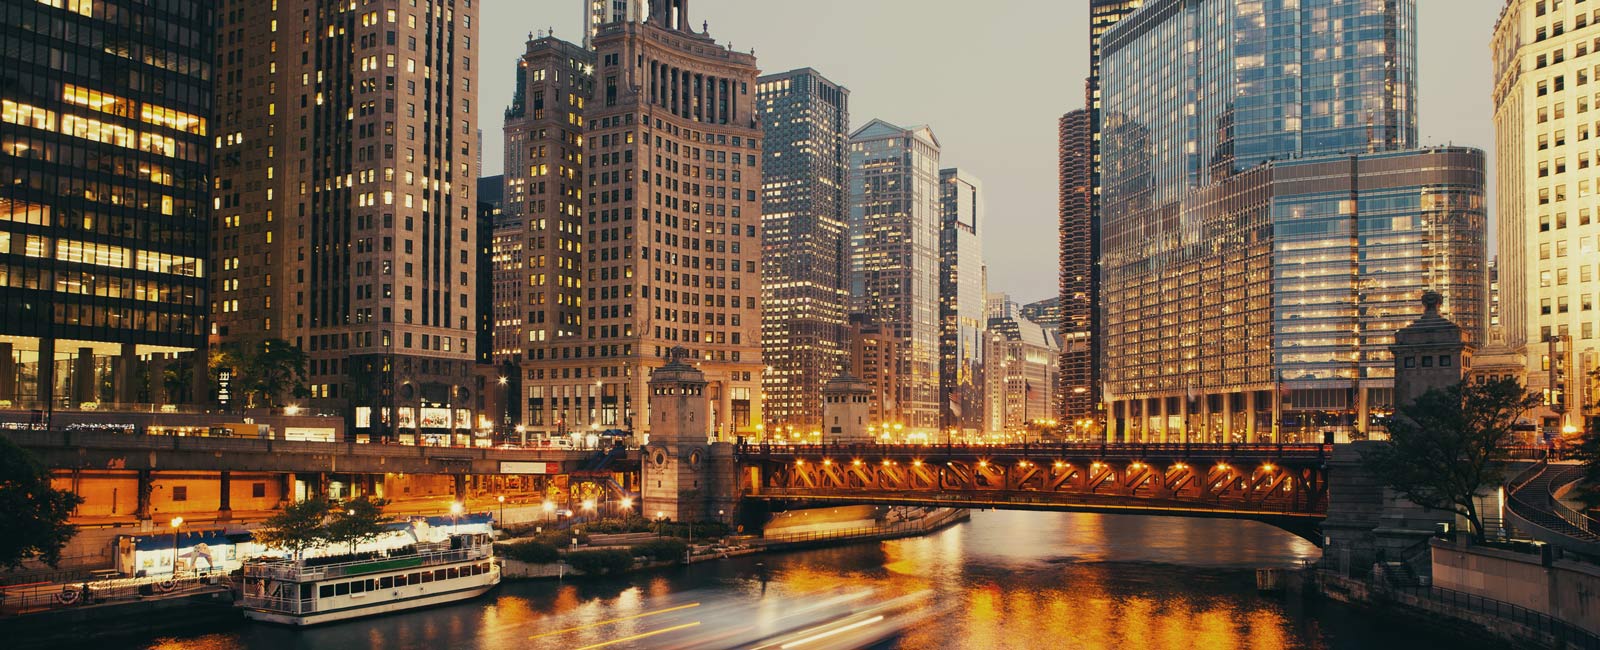 Enjoy the scenic views on a Chicago vacation with Hilton Grand Vacations